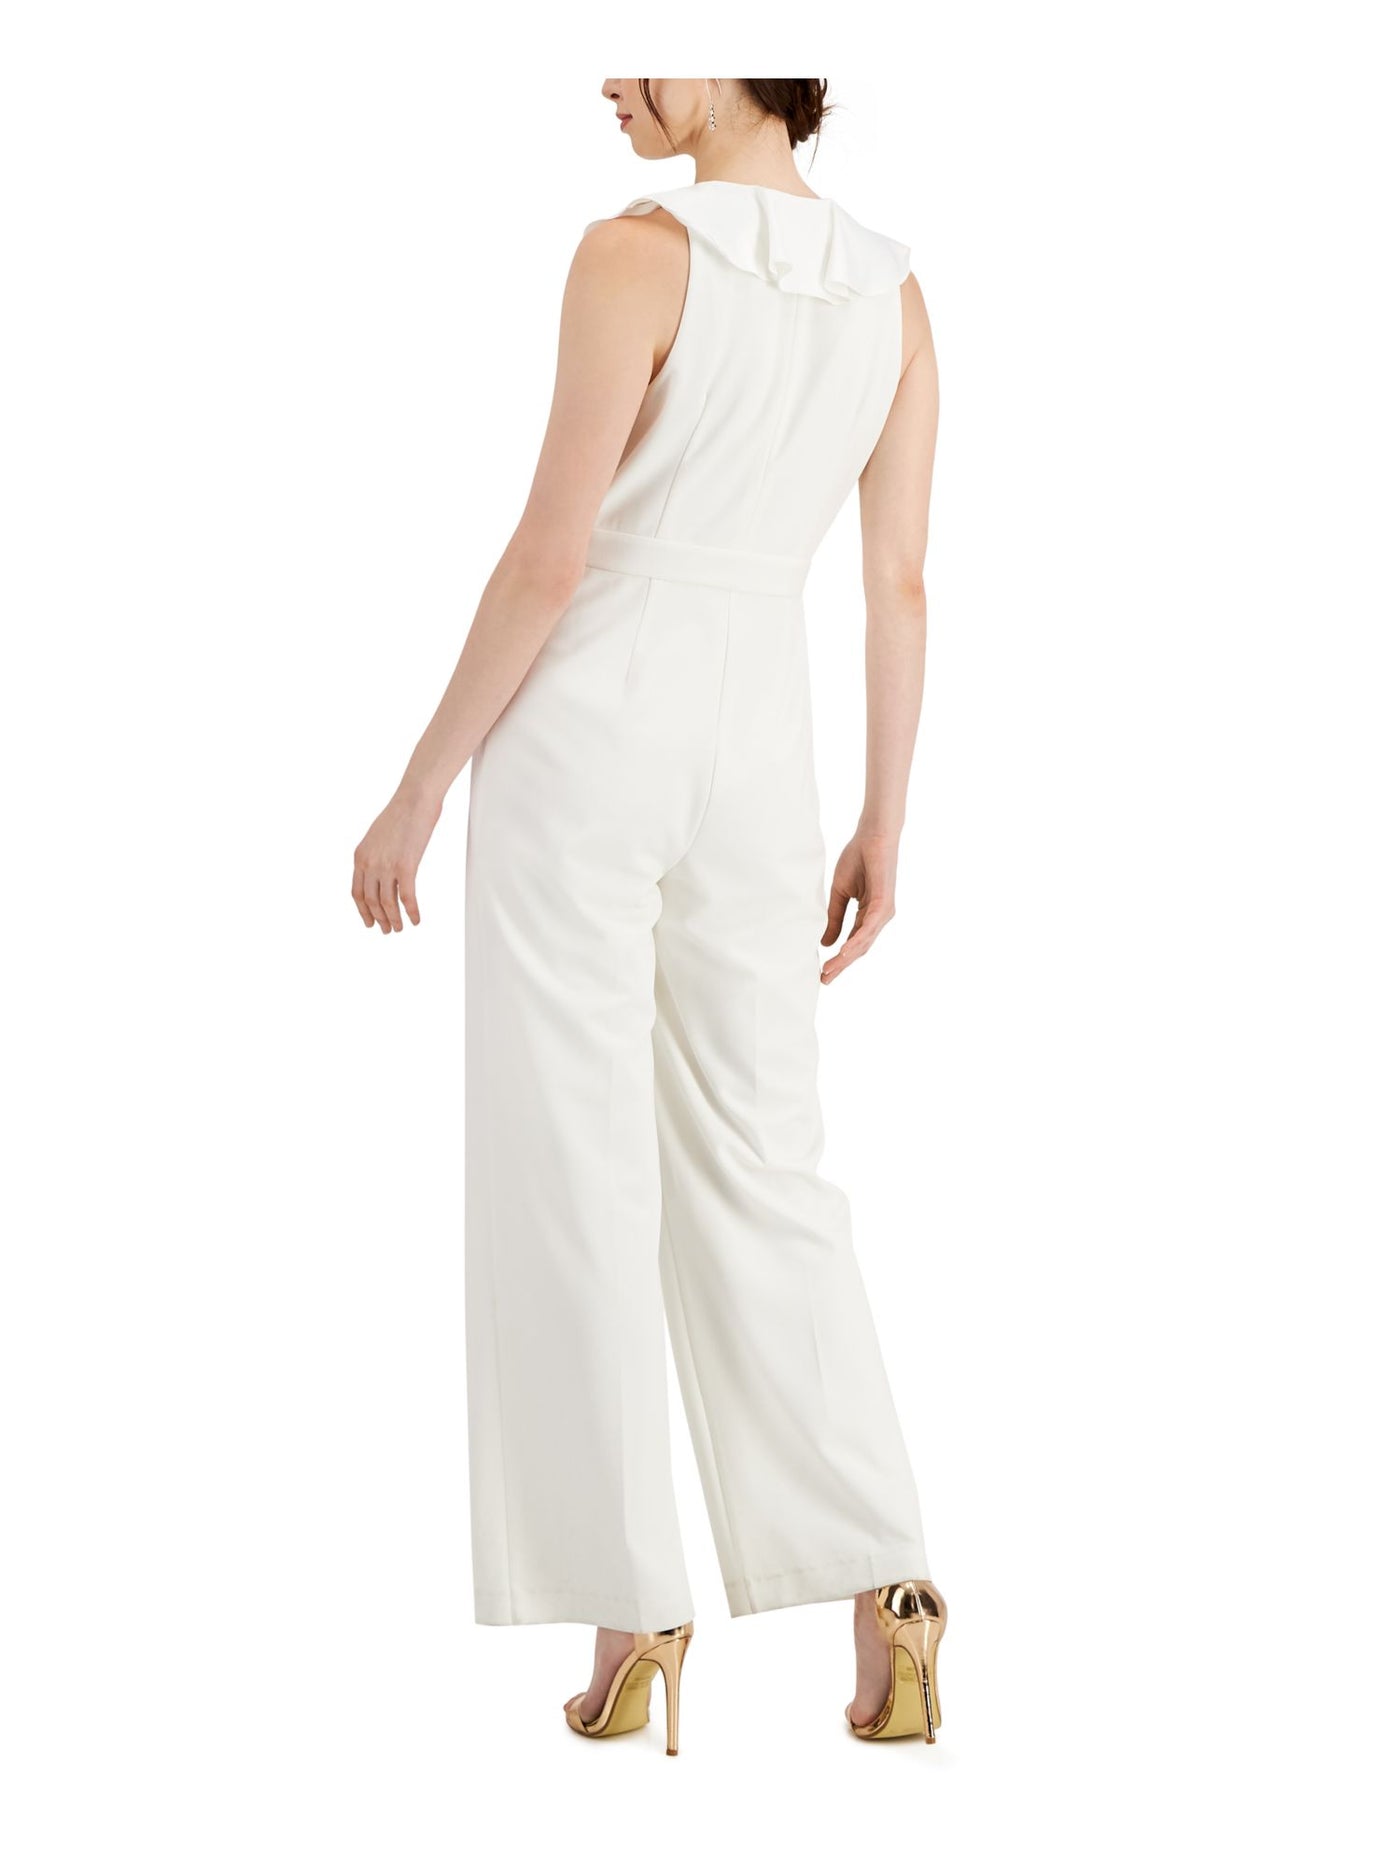 ADRIANNA PAPELL Womens White Stretch Ruffled Zippered Belted Sleeveless Surplice Neckline Formal Wide Leg Jumpsuit 0